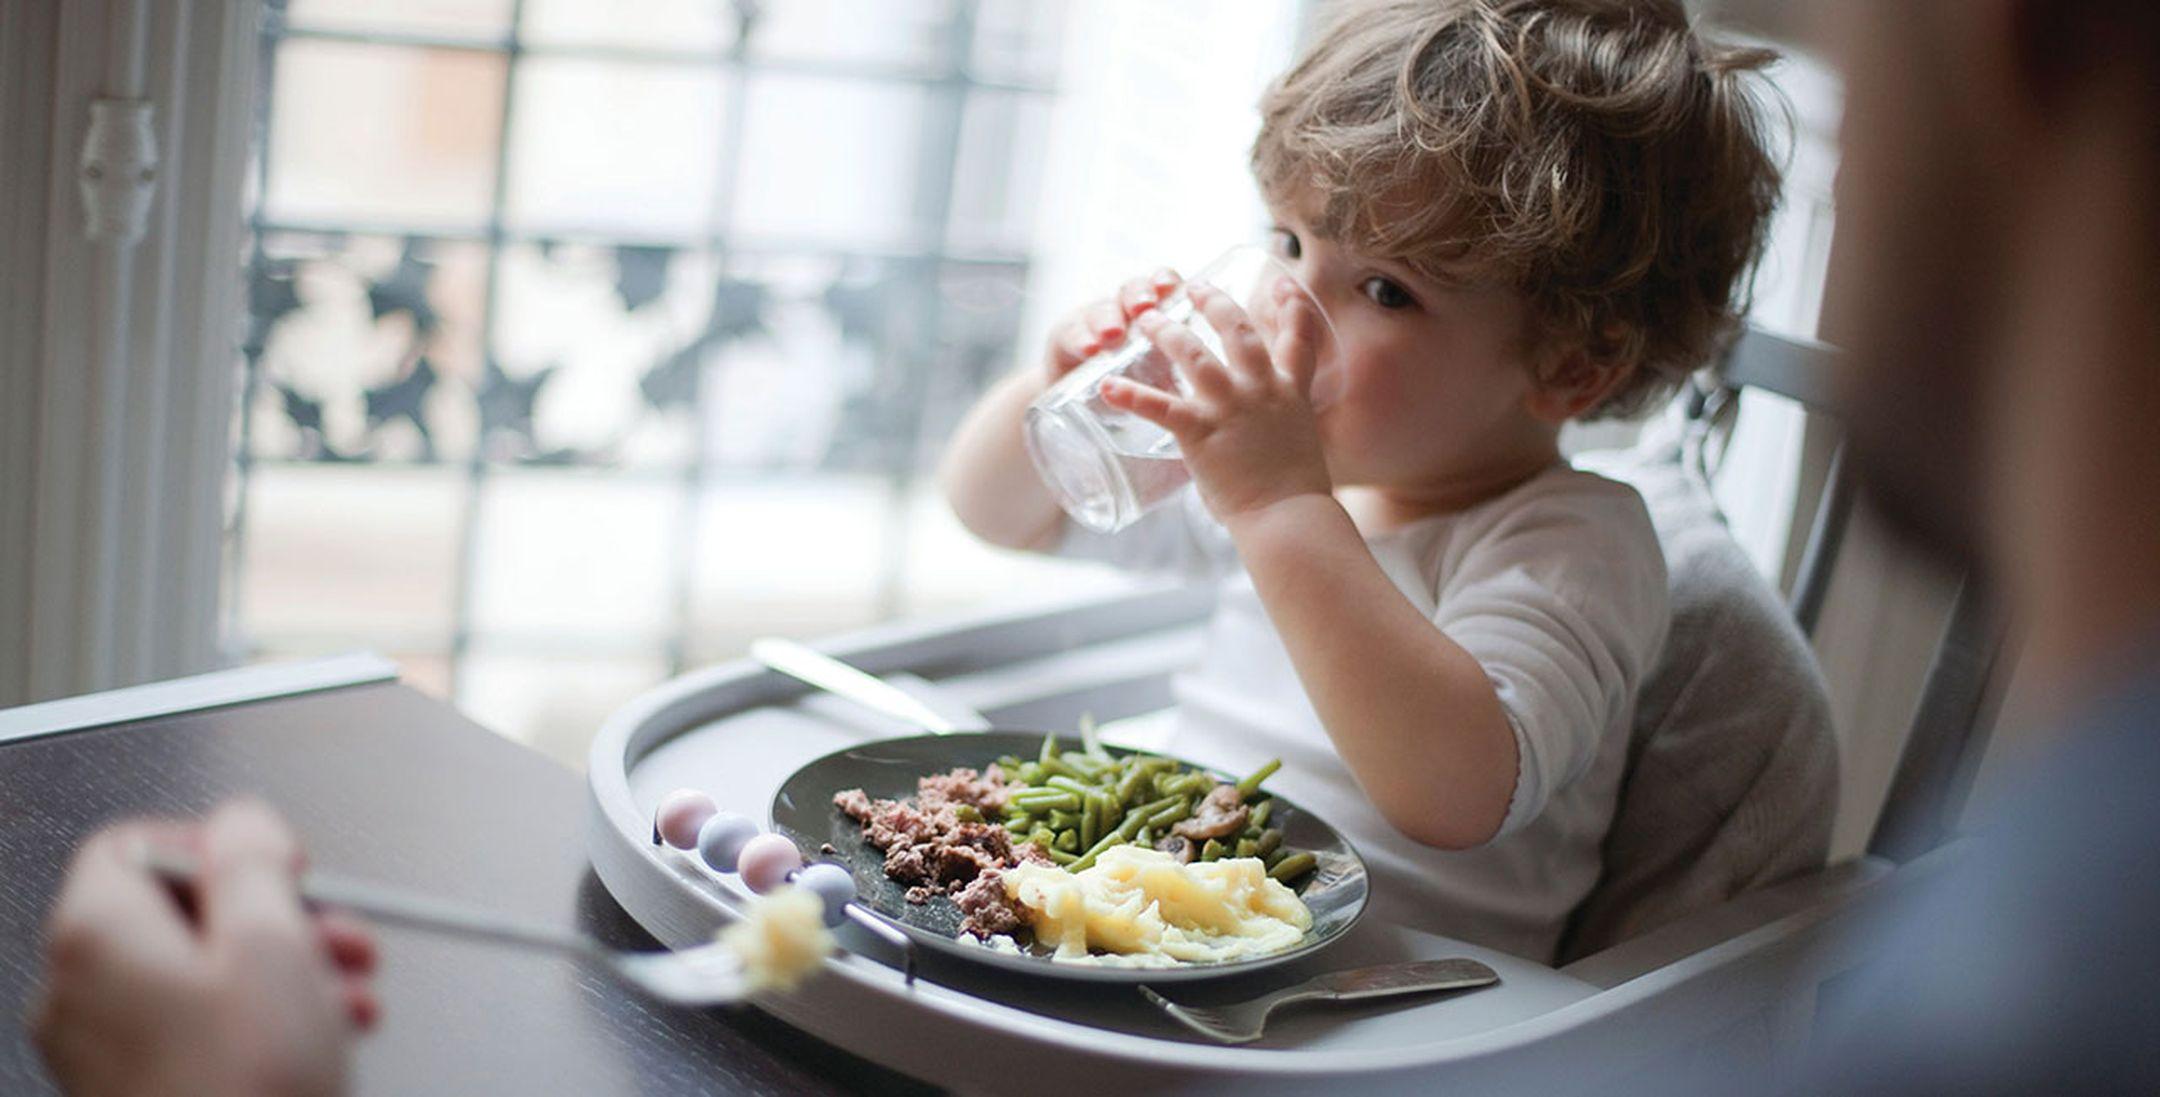 Small child sitting in a high chair with a plate full of food while drinking from a glass that he's holding with two hands.